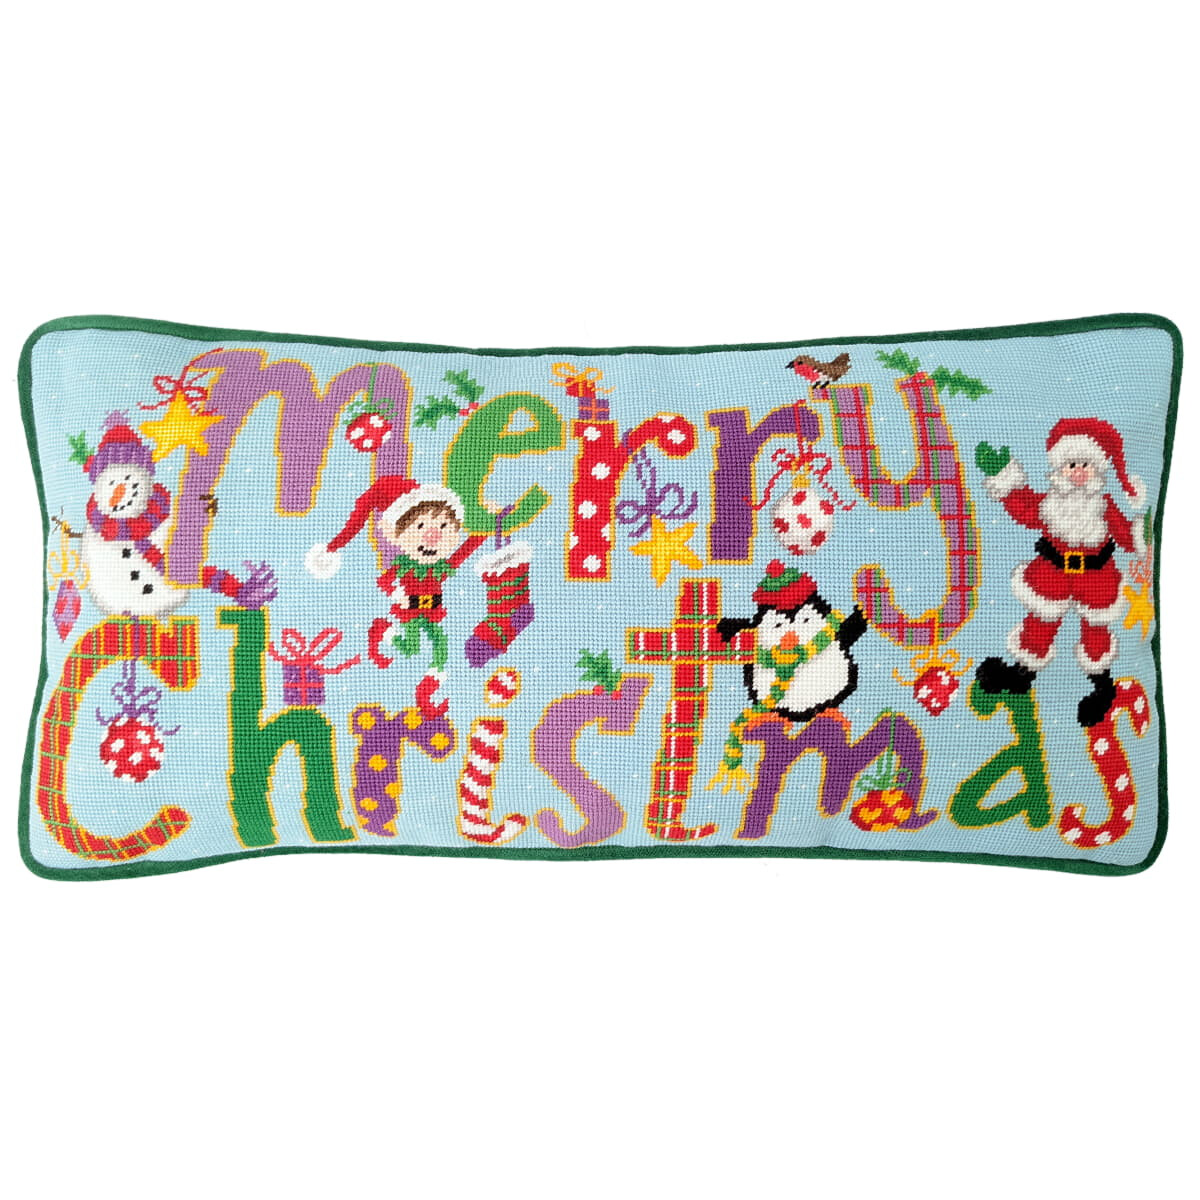 Festive rectangular cushion with colorful, cross-stitched...